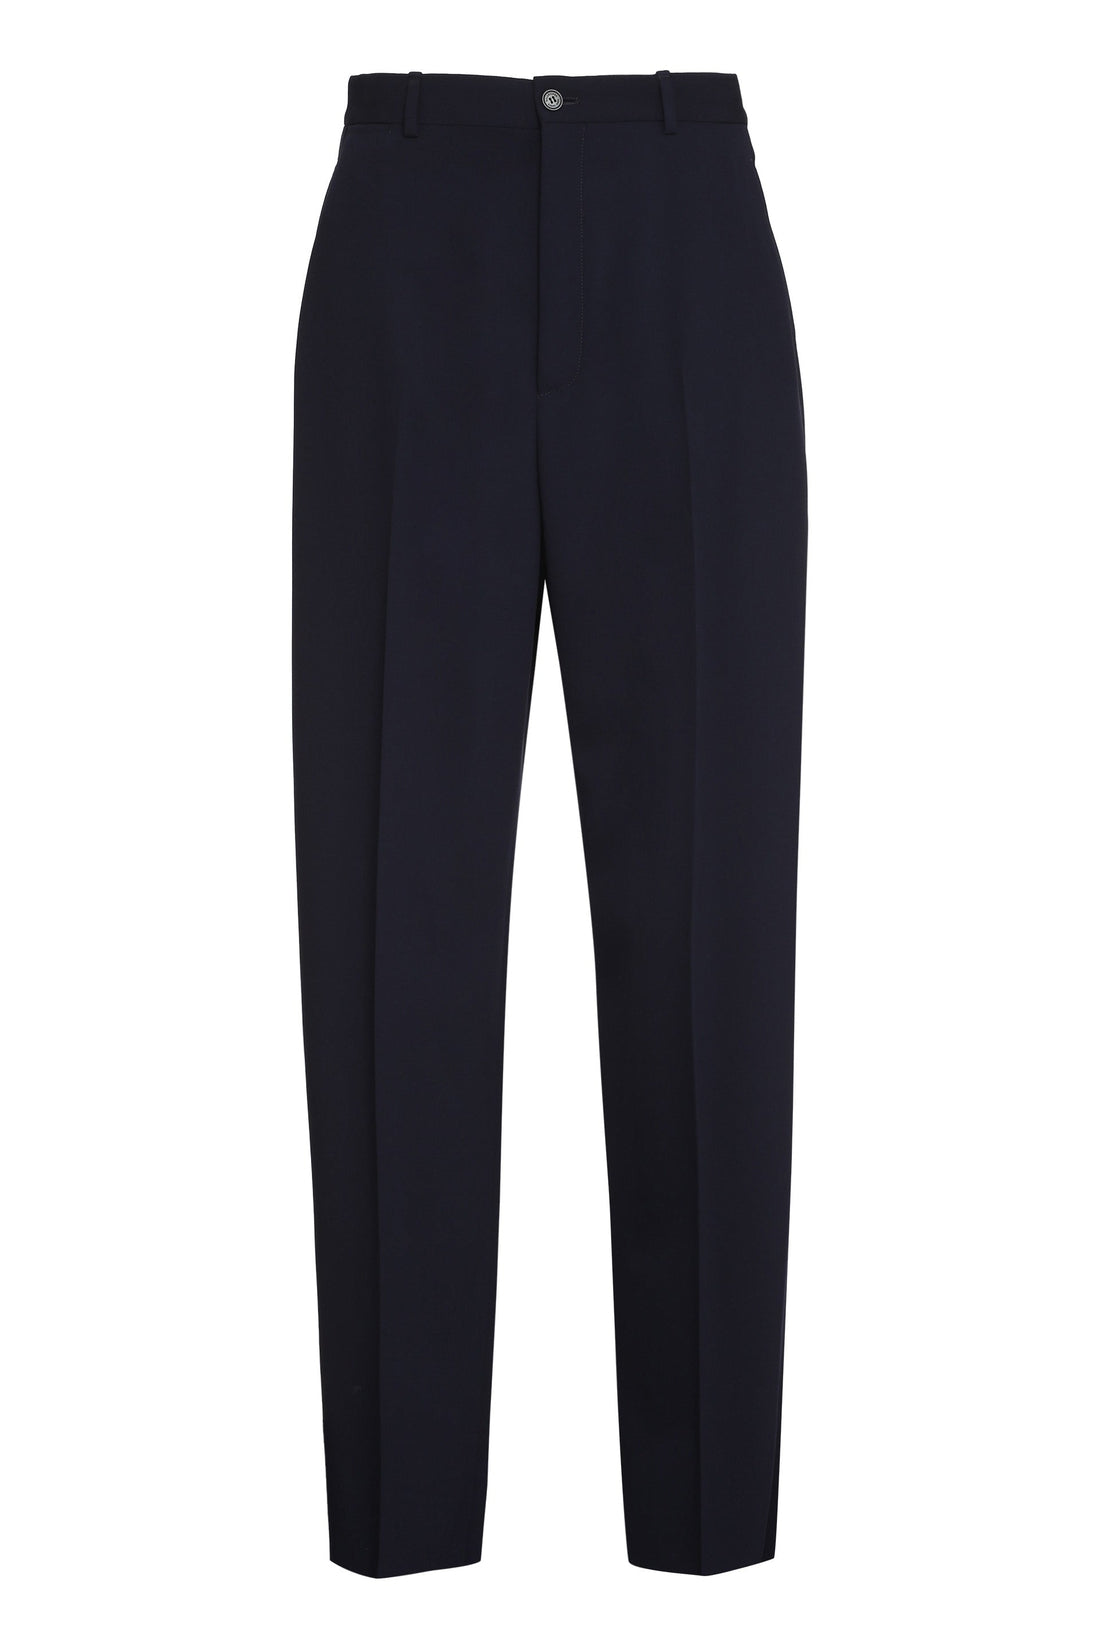 Balenciaga-OUTLET-SALE-Wool trousers-ARCHIVIST